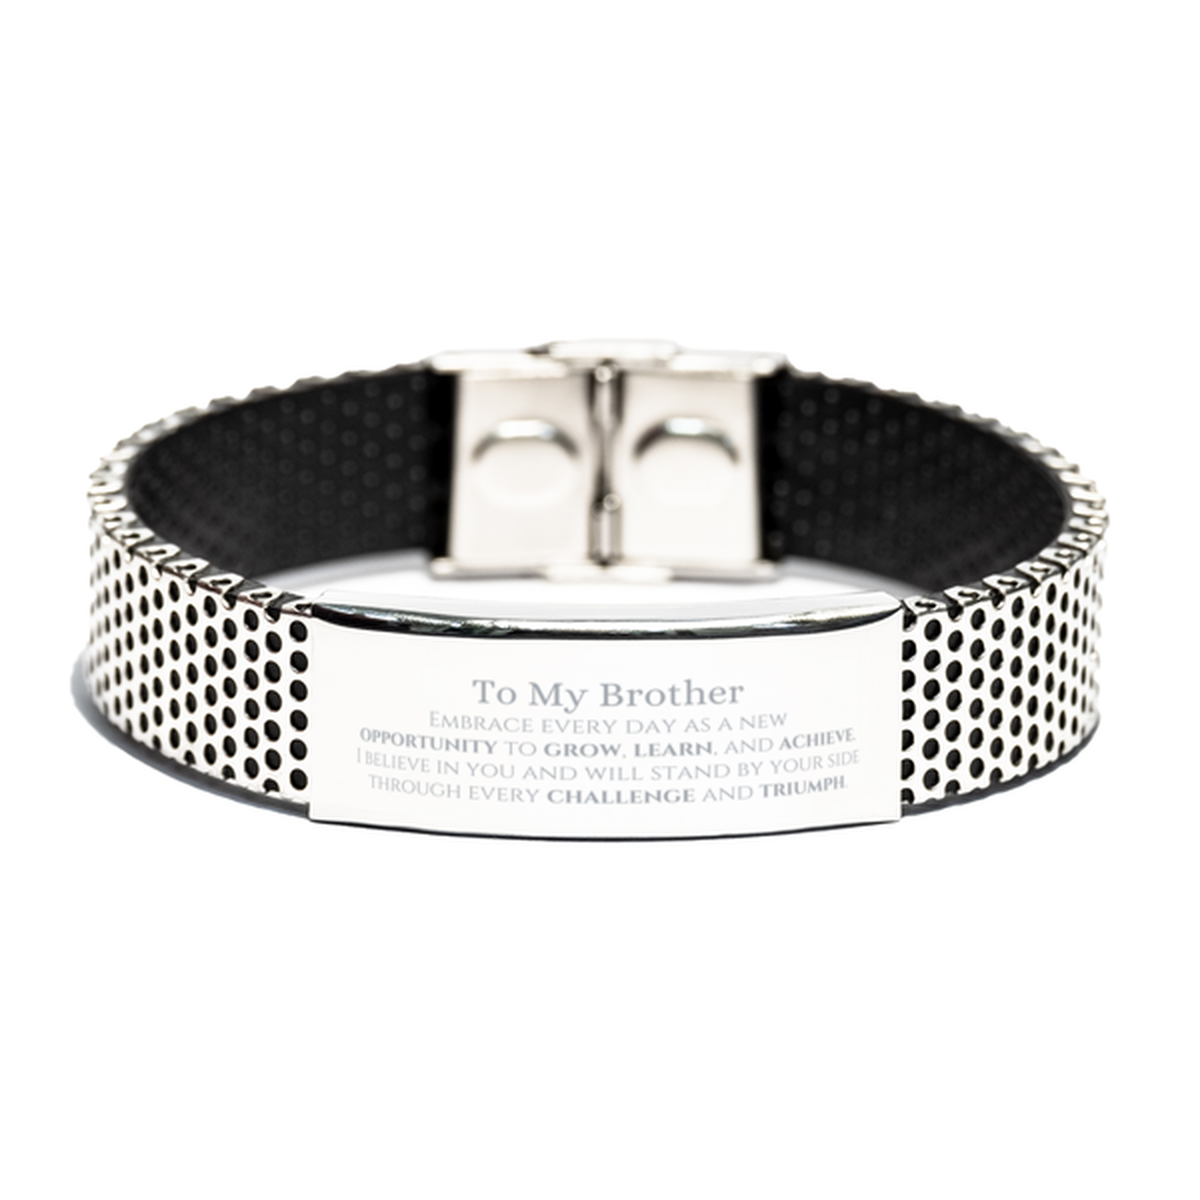 To My Brother Gifts, I believe in you and will stand by your side, Inspirational Stainless Steel Bracelet For Brother, Birthday Christmas Motivational Brother Gifts